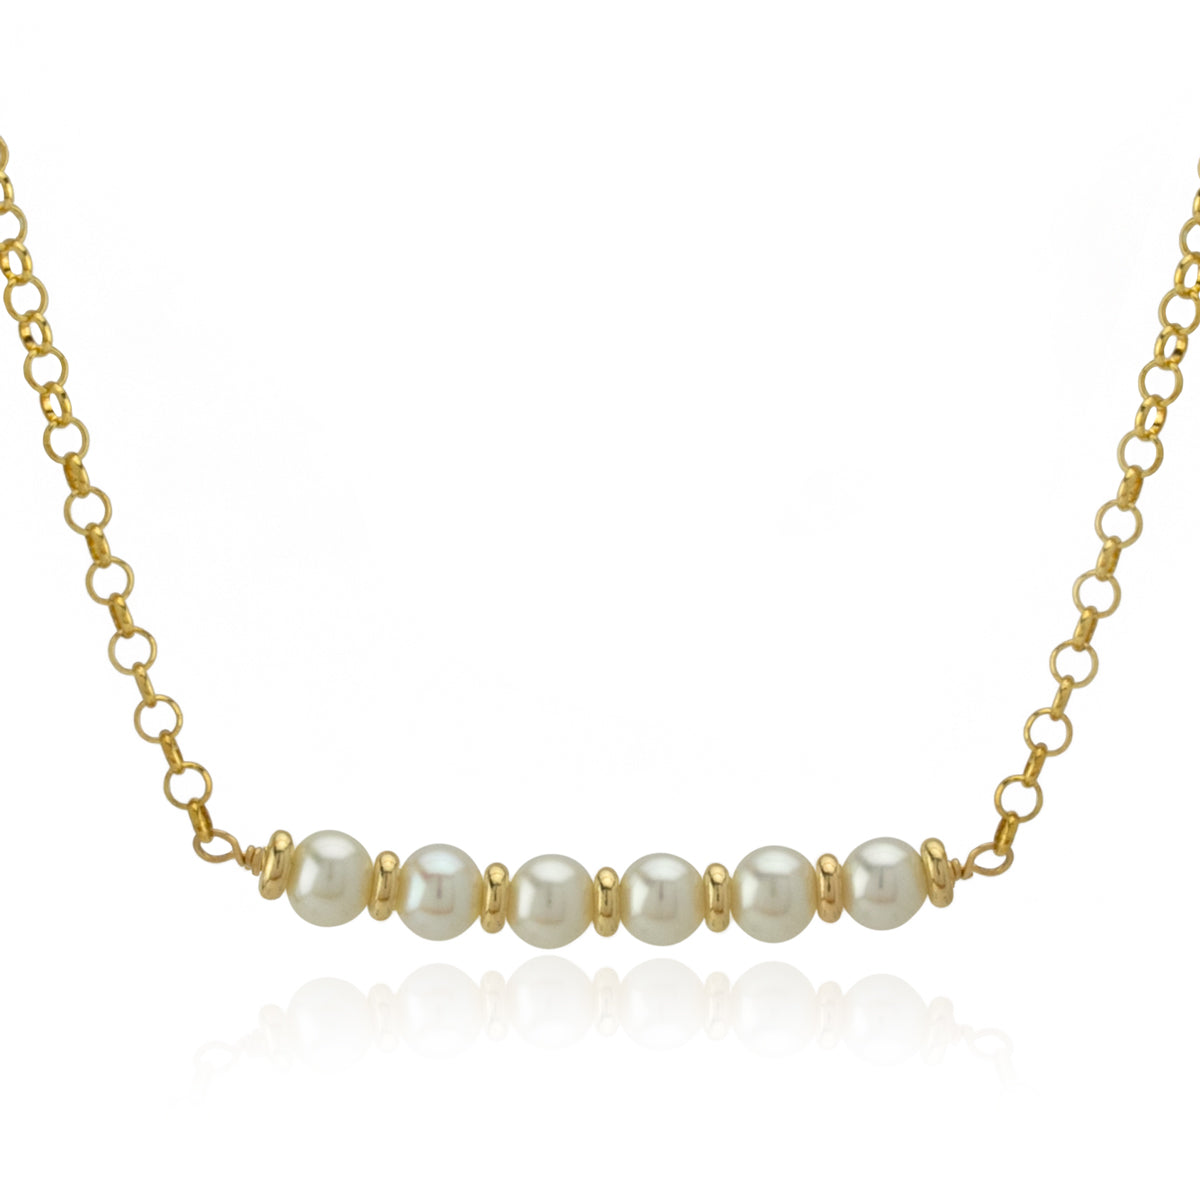 5mm Pearl Bar Necklace